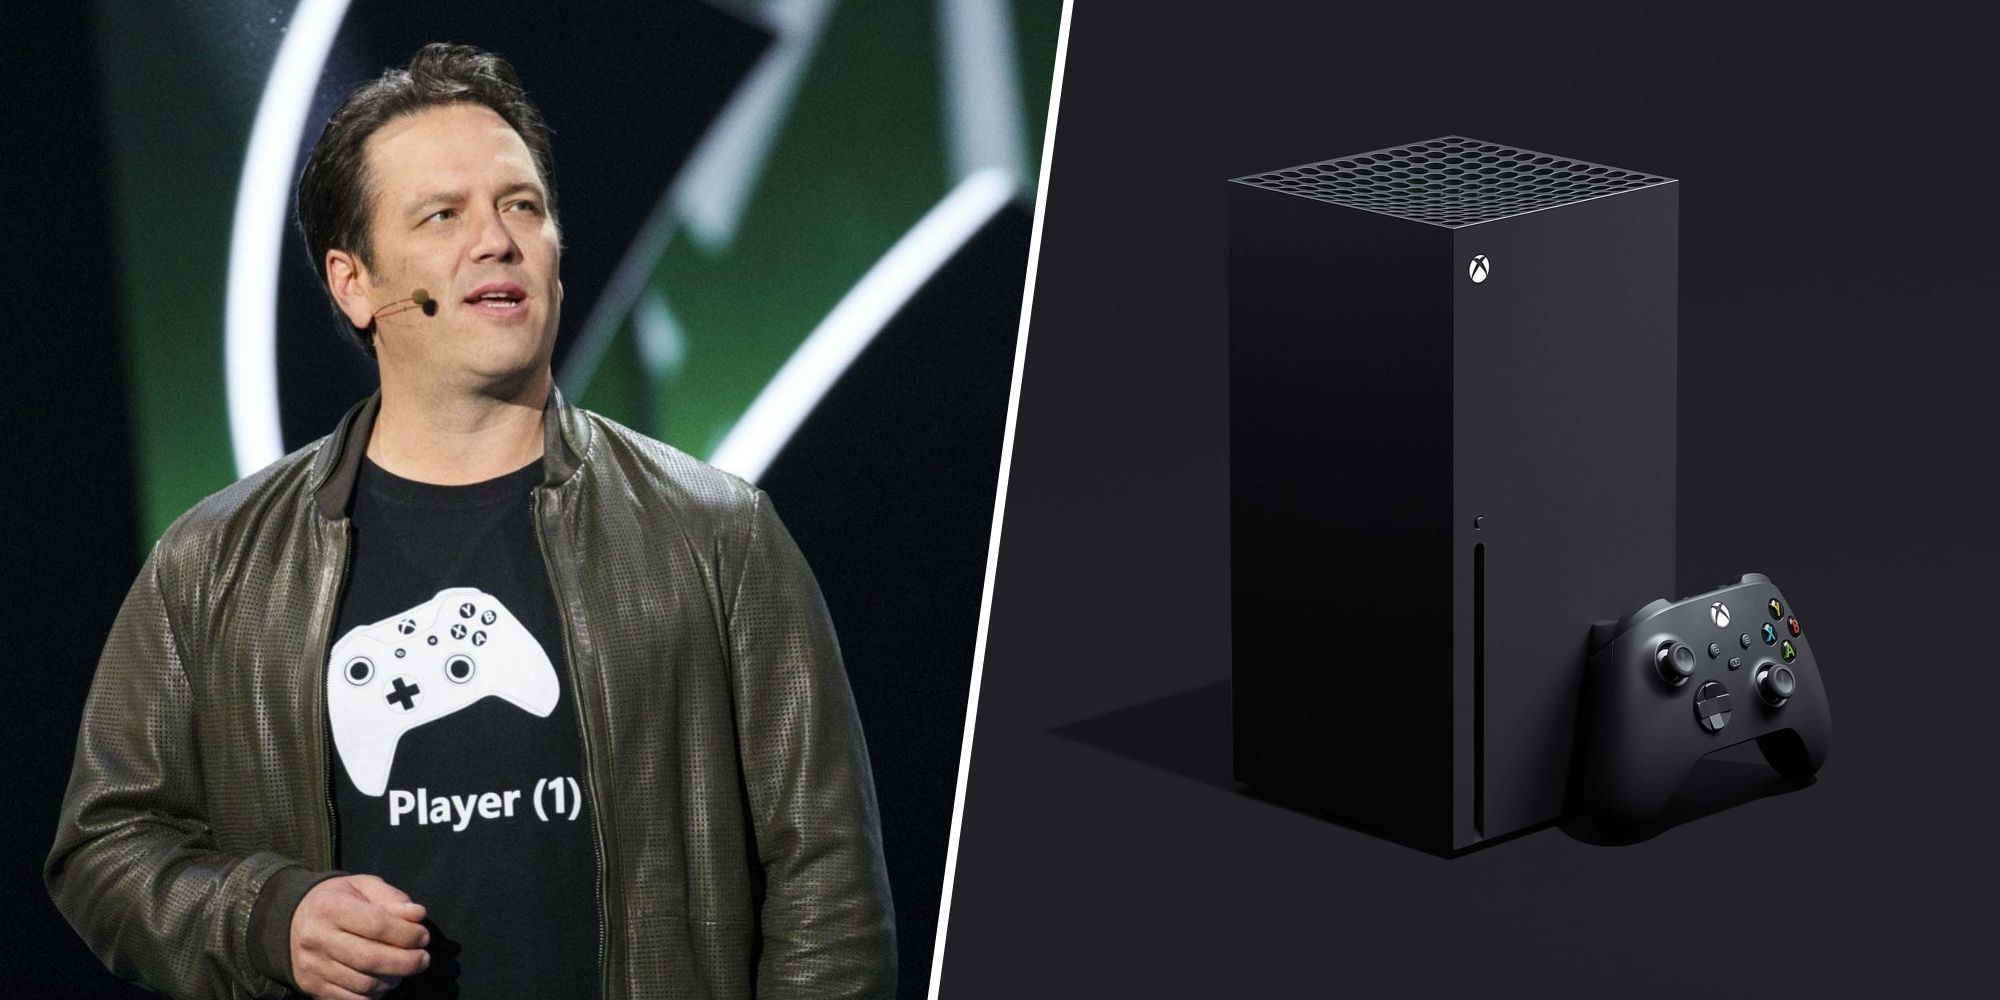 Phil Spencer next to an Xbox Series X